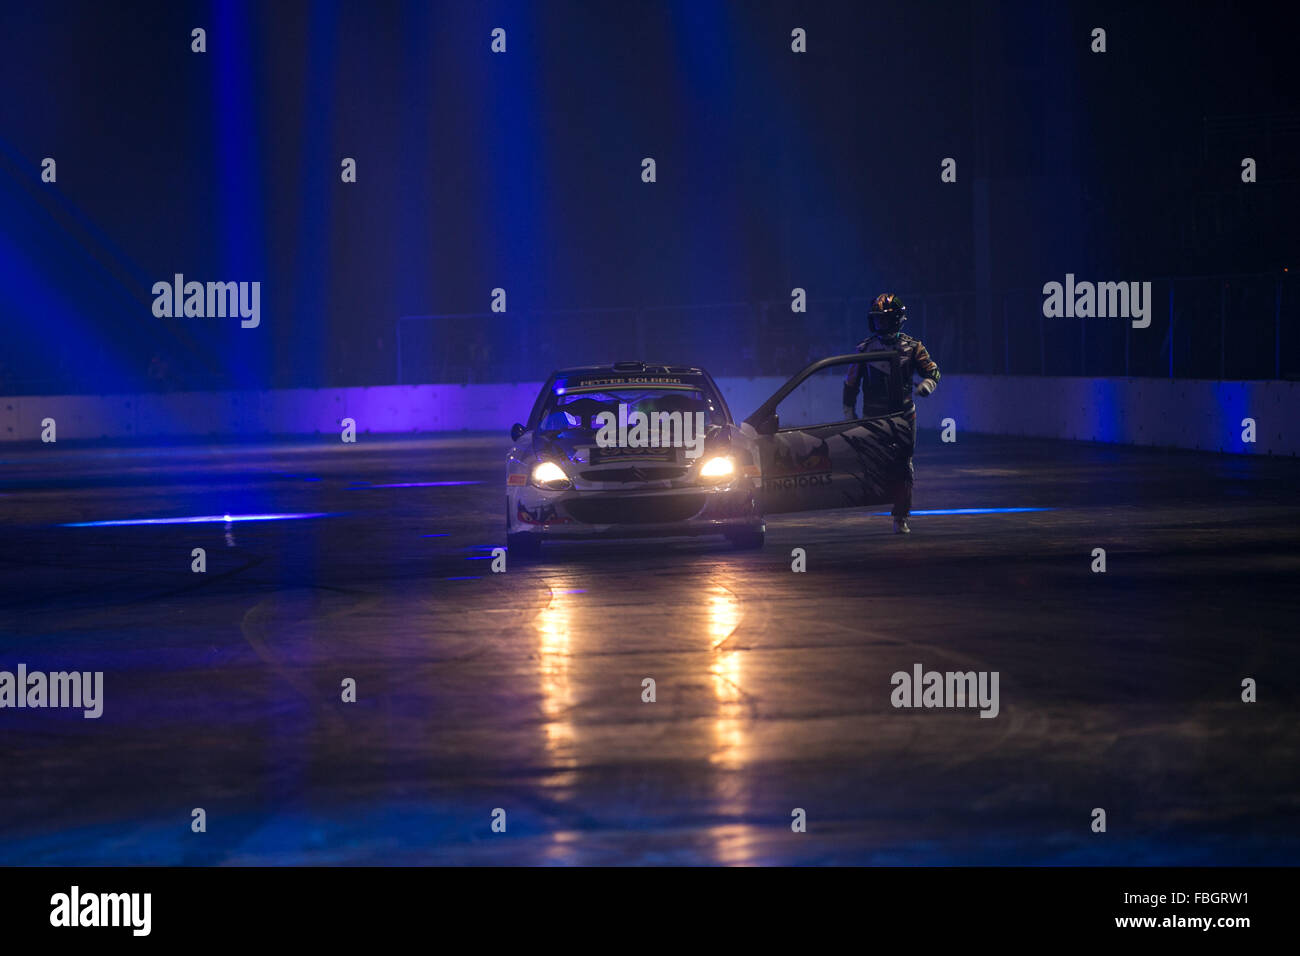 Birmingham, UK, 16th Jan, 2016. Peter Solberg FIA World Rallycross champion in the Live Action Arena at Autosport International at the NEC in Birmingham UK Credit:  steven roe/Alamy Live News Stock Photo